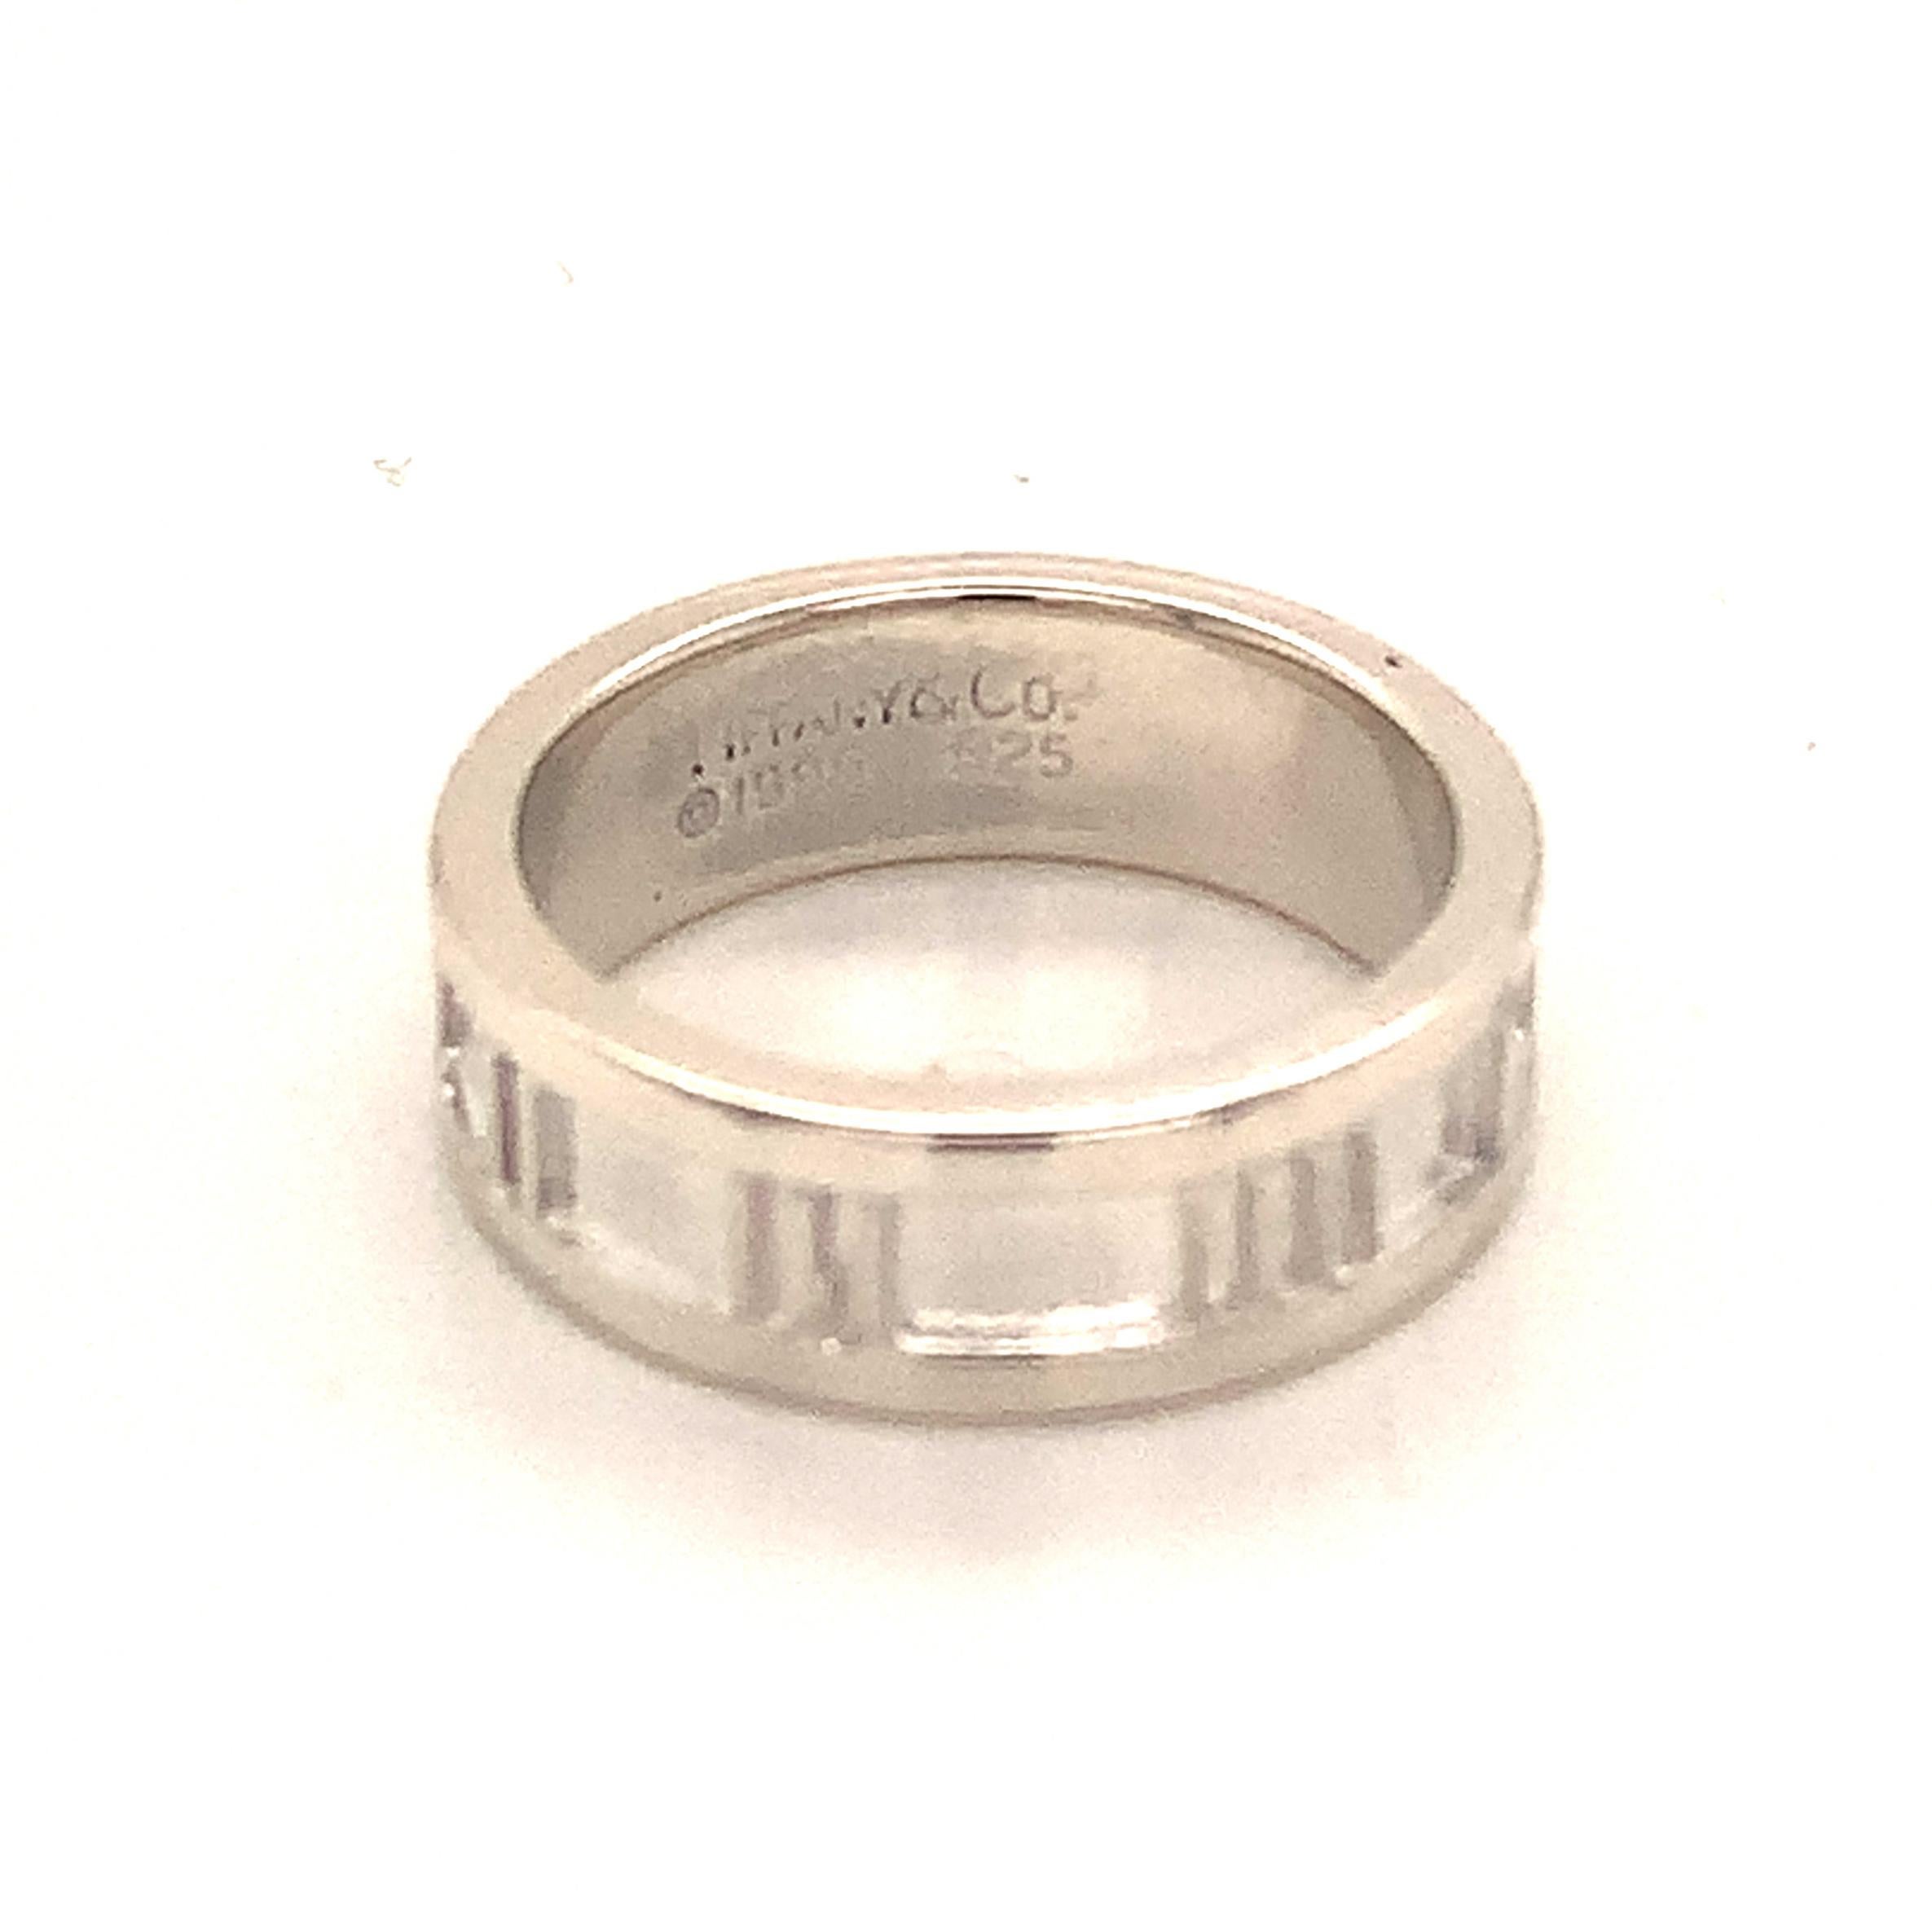 silver ring weight in grams